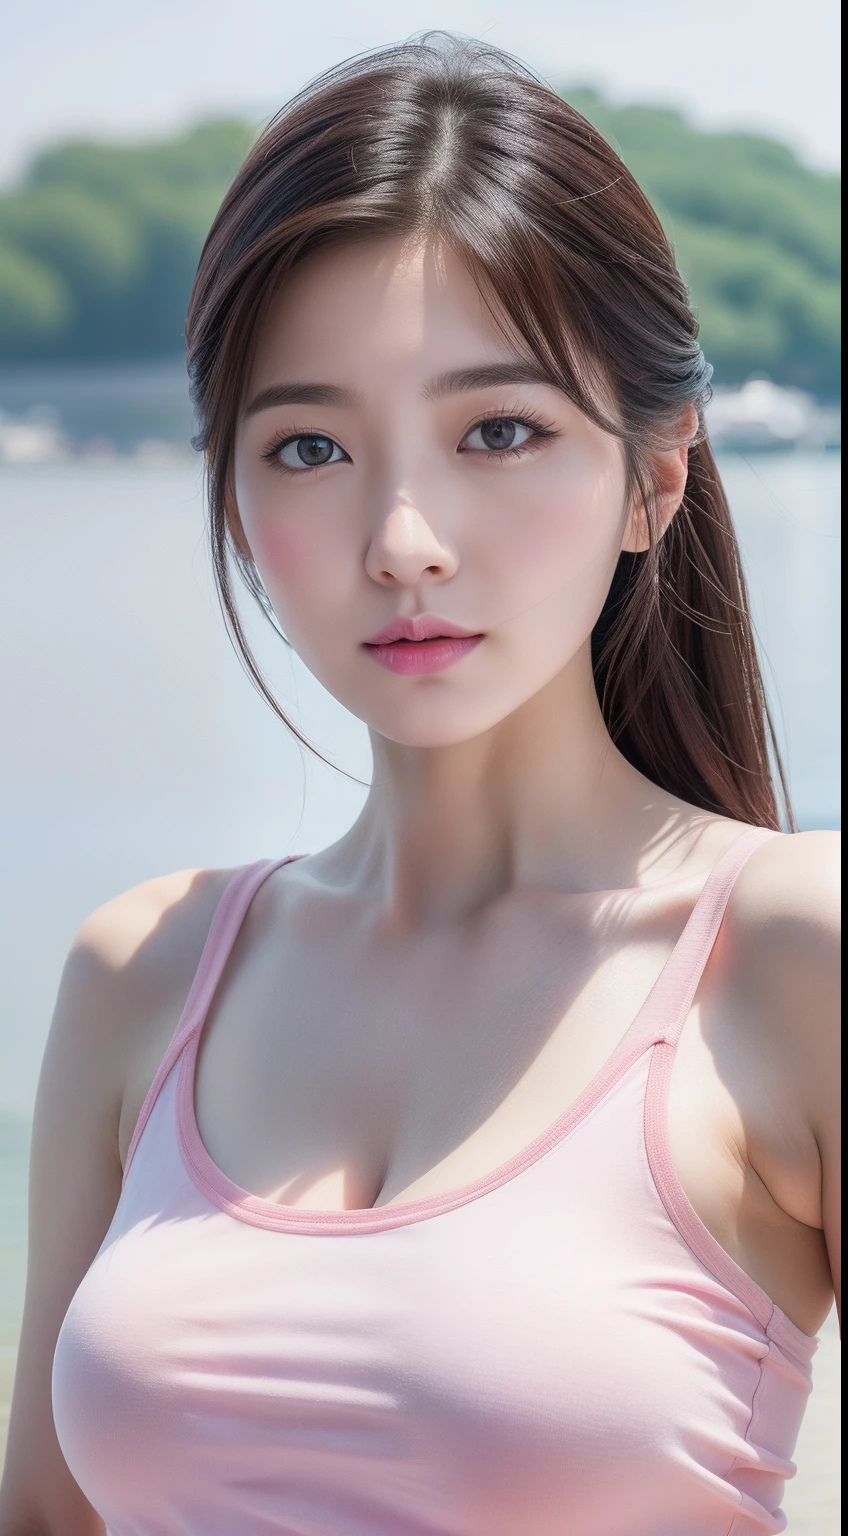 realistic photos of 1 cute Korean star, hair between eyes, white skin, thin makeup, 32 inch breasts size, wearing pink tank top, shorts, at river side, cruise ship is backdrop, upper body portrait, Hyperrealism, UHD